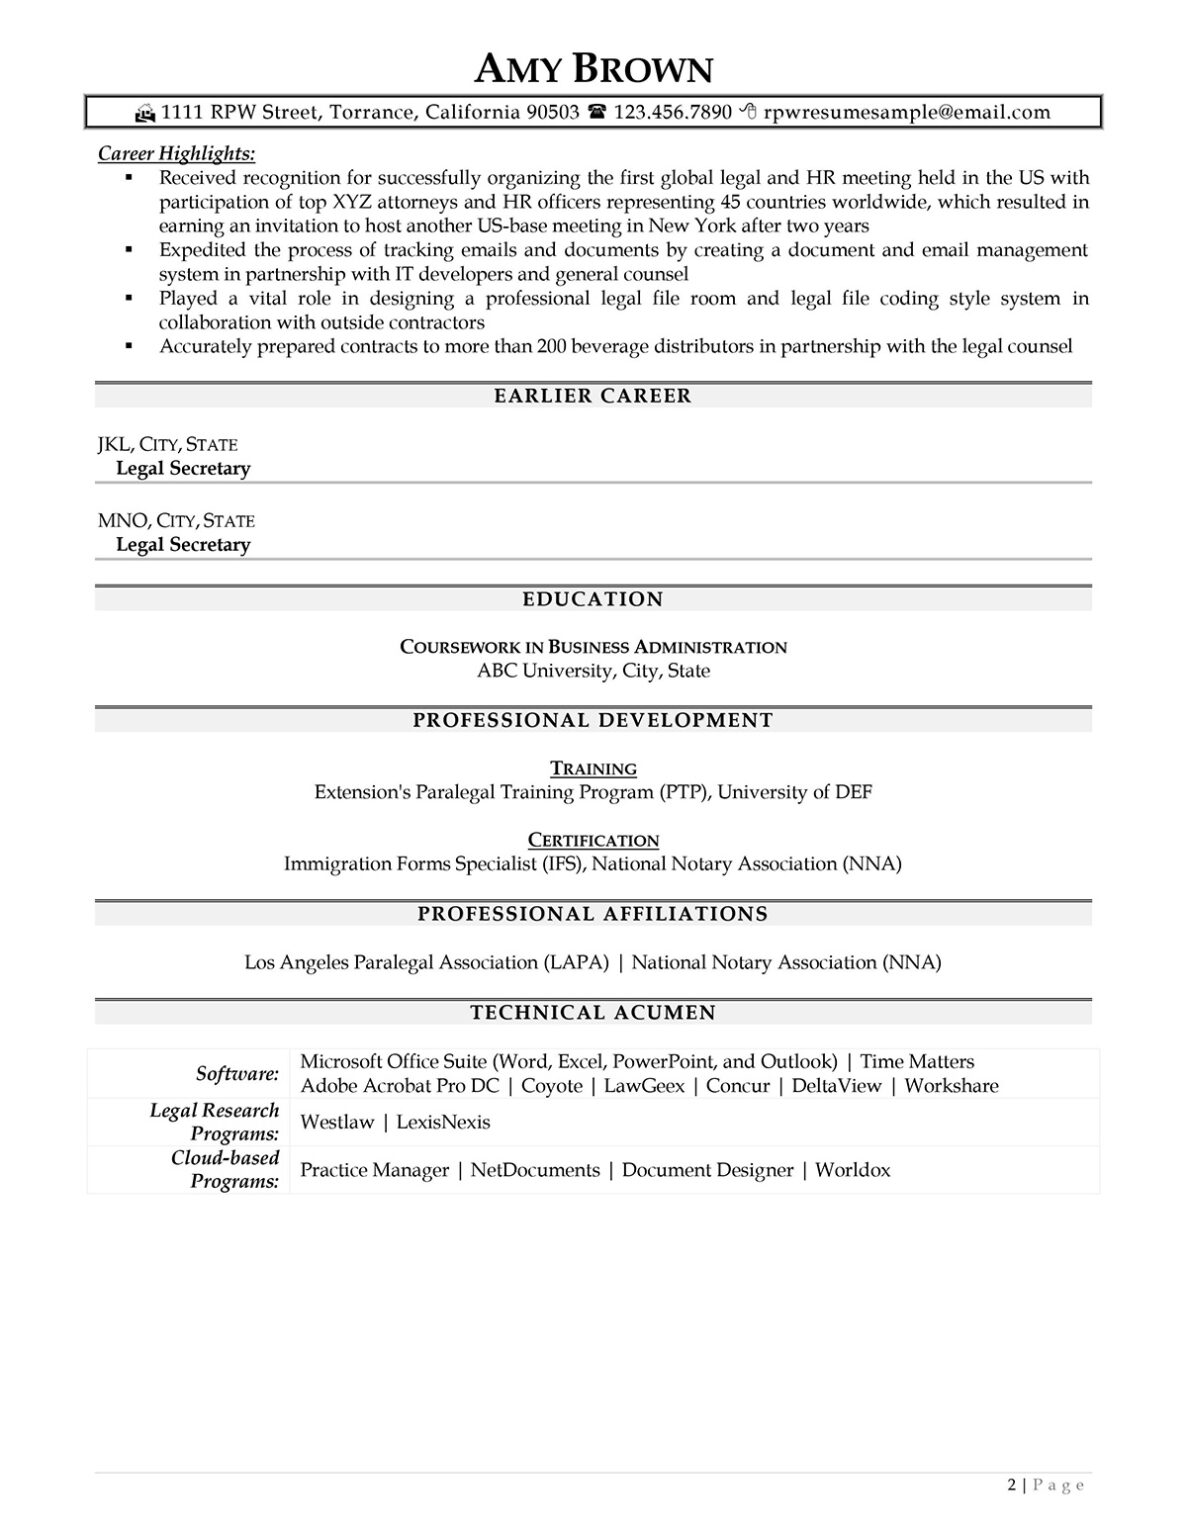 how to write a resume objective for paralegal